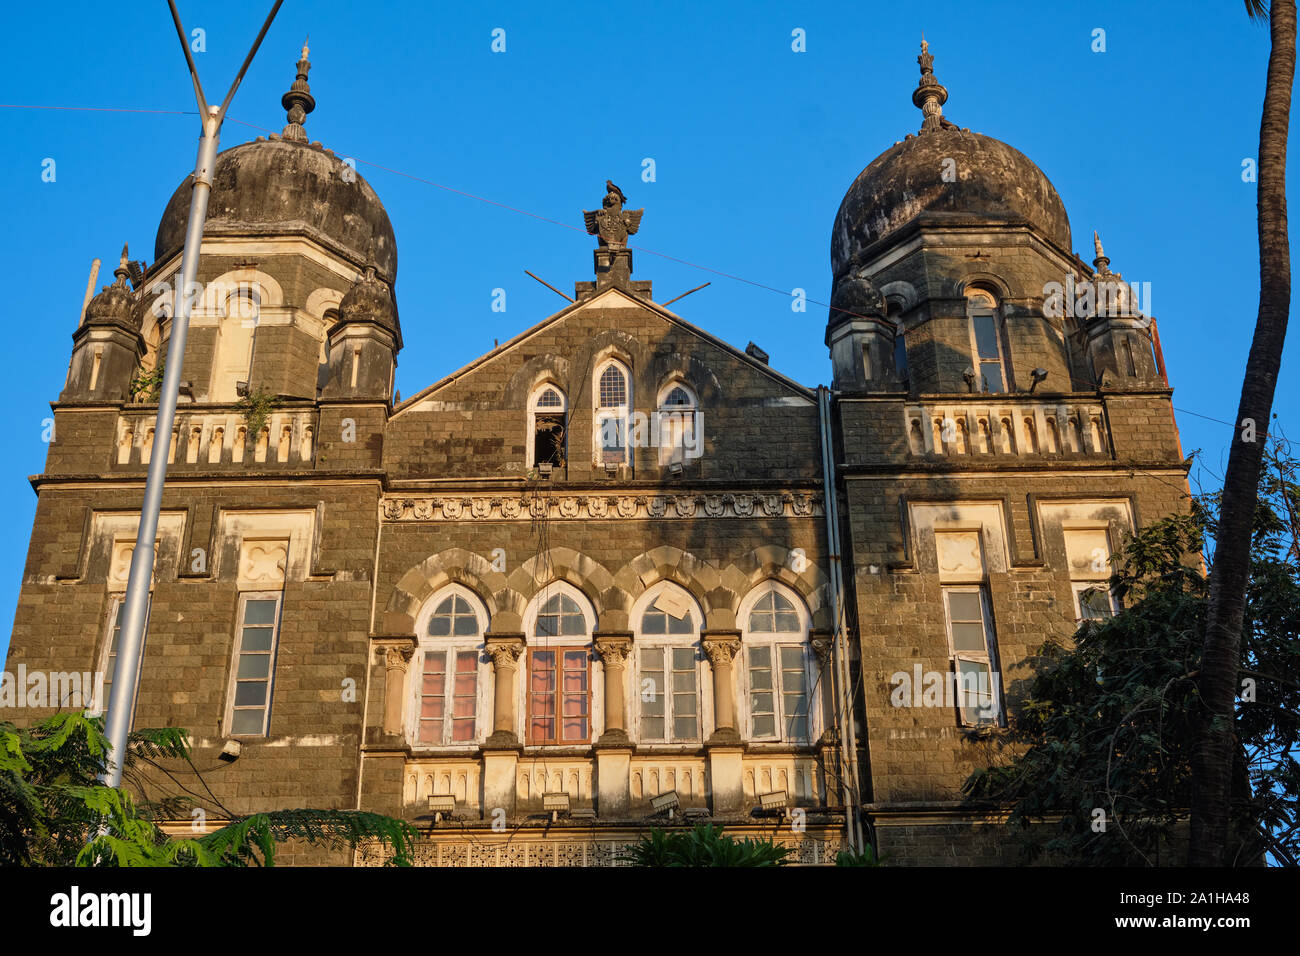 An old colonial-era building in Fort area, Mumbai (Bombay) India, in a style often called Bombay Gothic Stock Photo